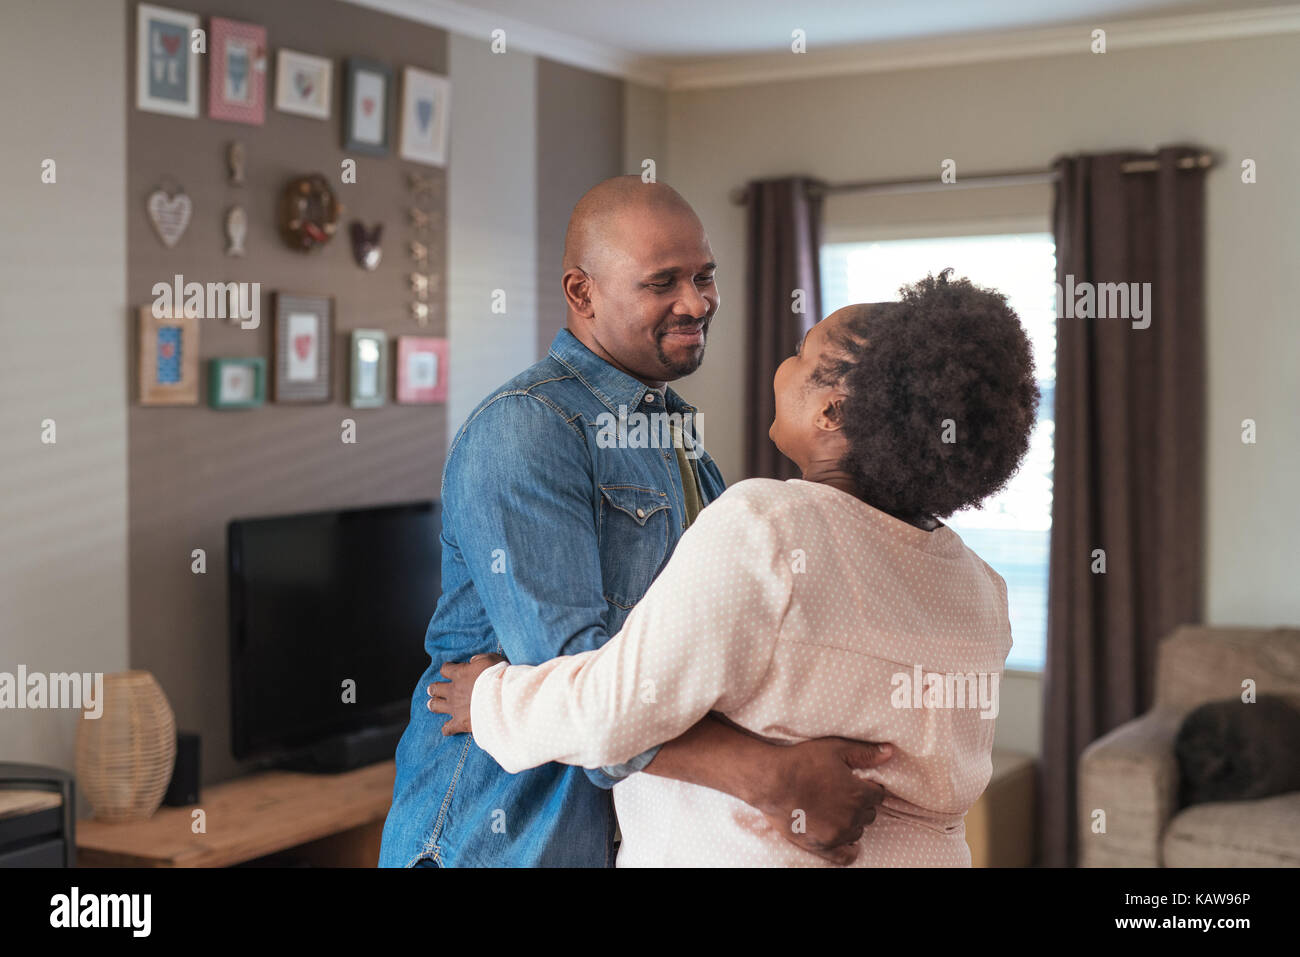 African couple smiling and dancing together in their living room Stock Photo